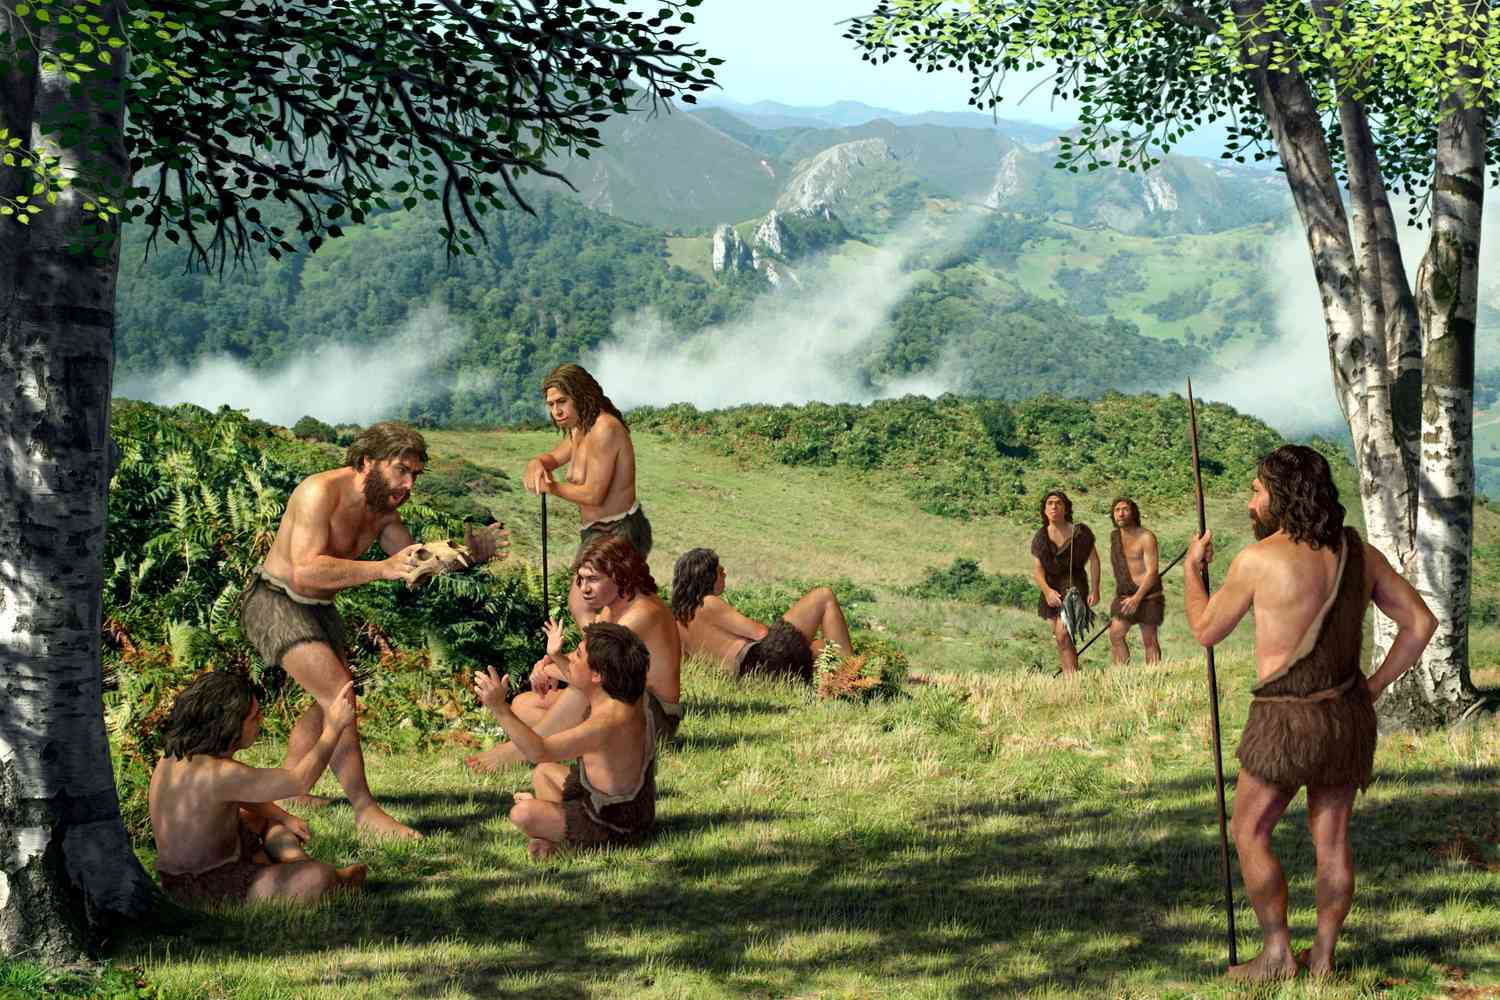 26 interesting facts about Paleolithic Age